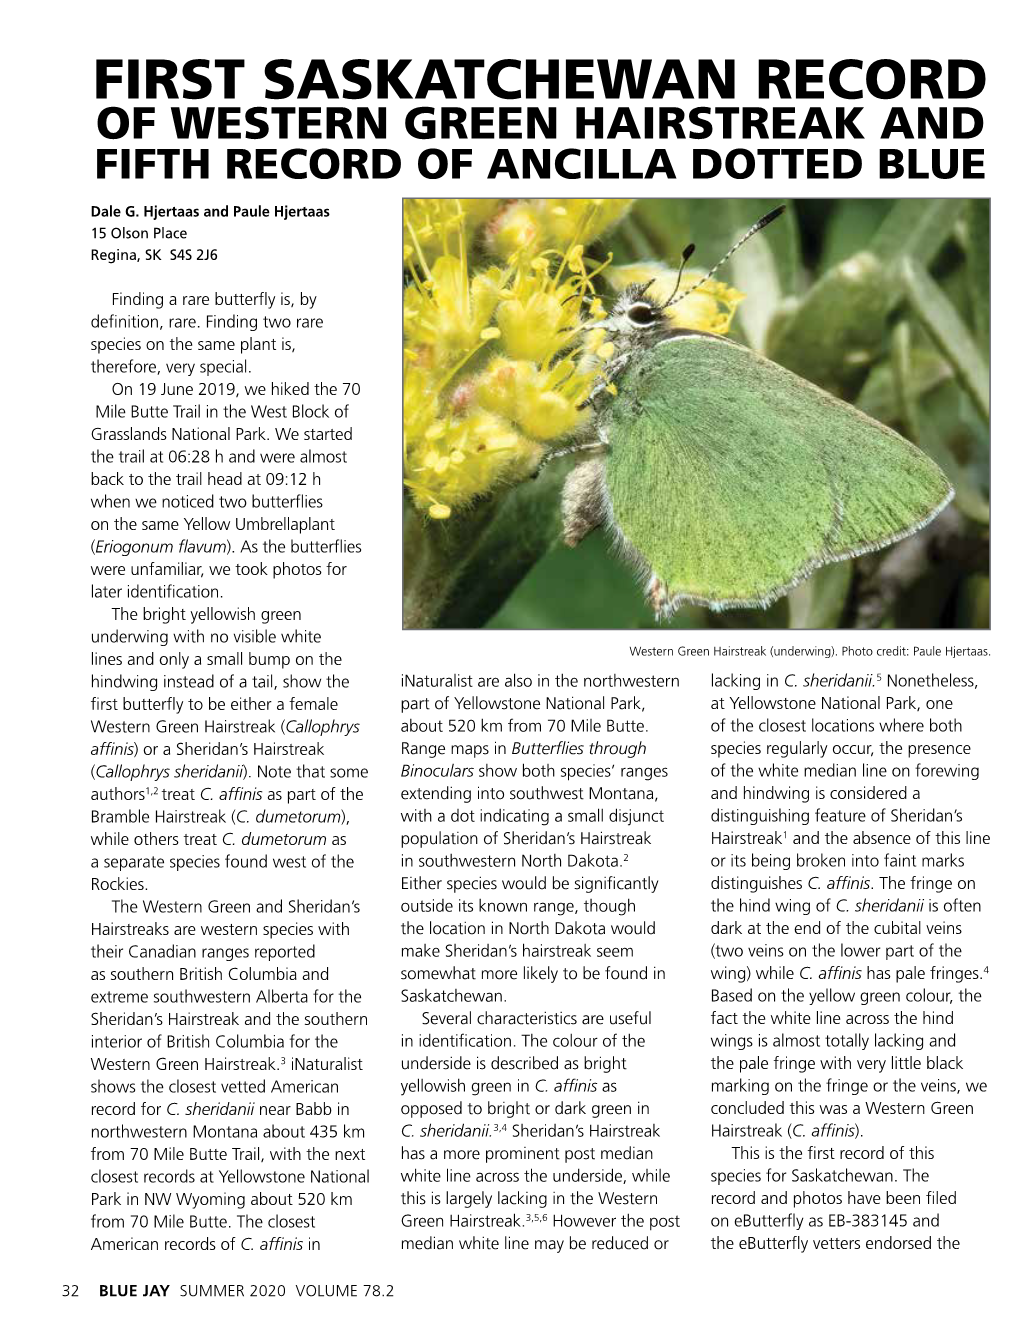 First Saskatchewan Record of Western Green Hairstreak and Fifth Record of Ancilla Dotted Blue